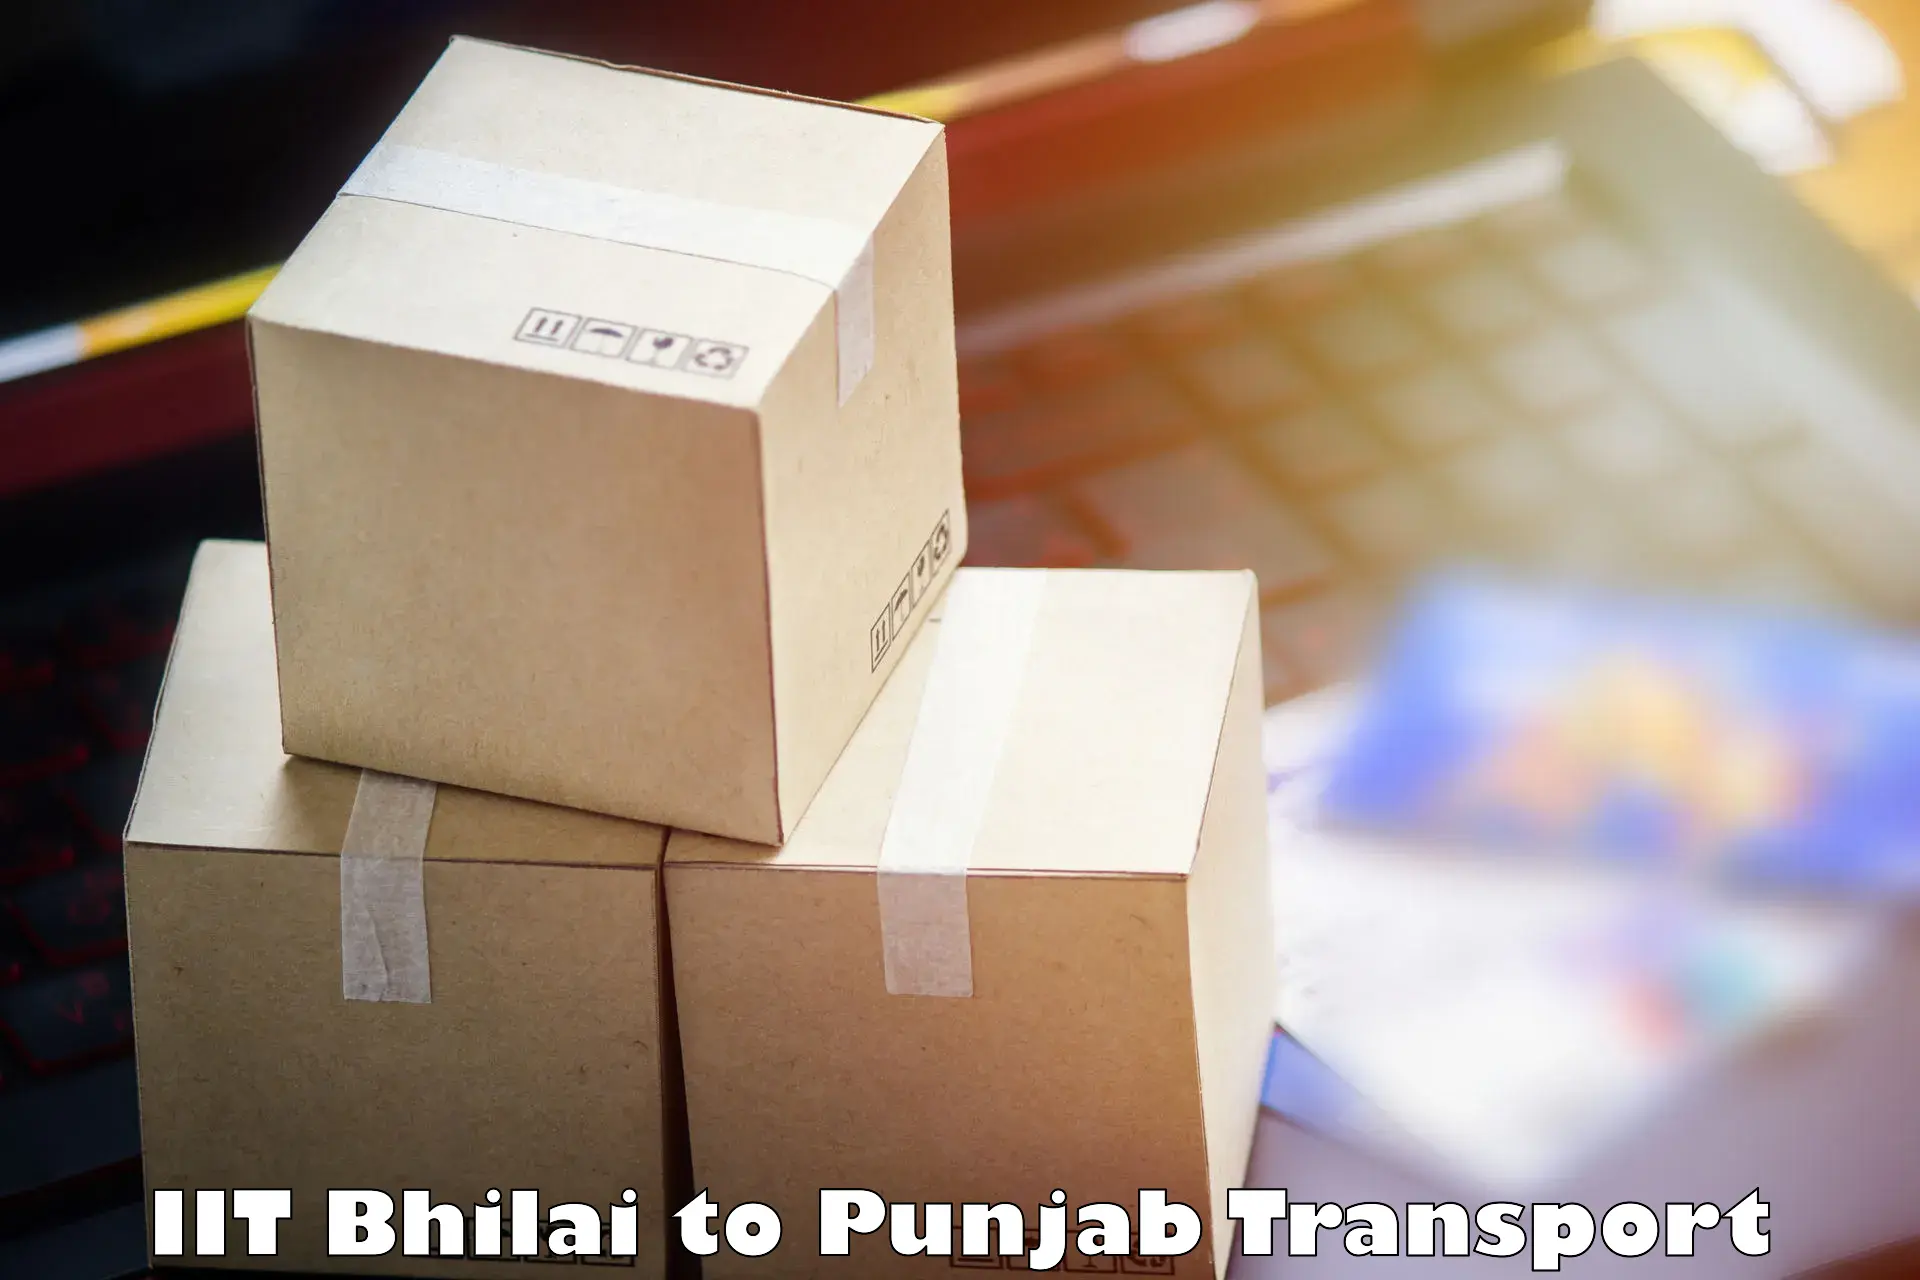 Express transport services IIT Bhilai to Begowal